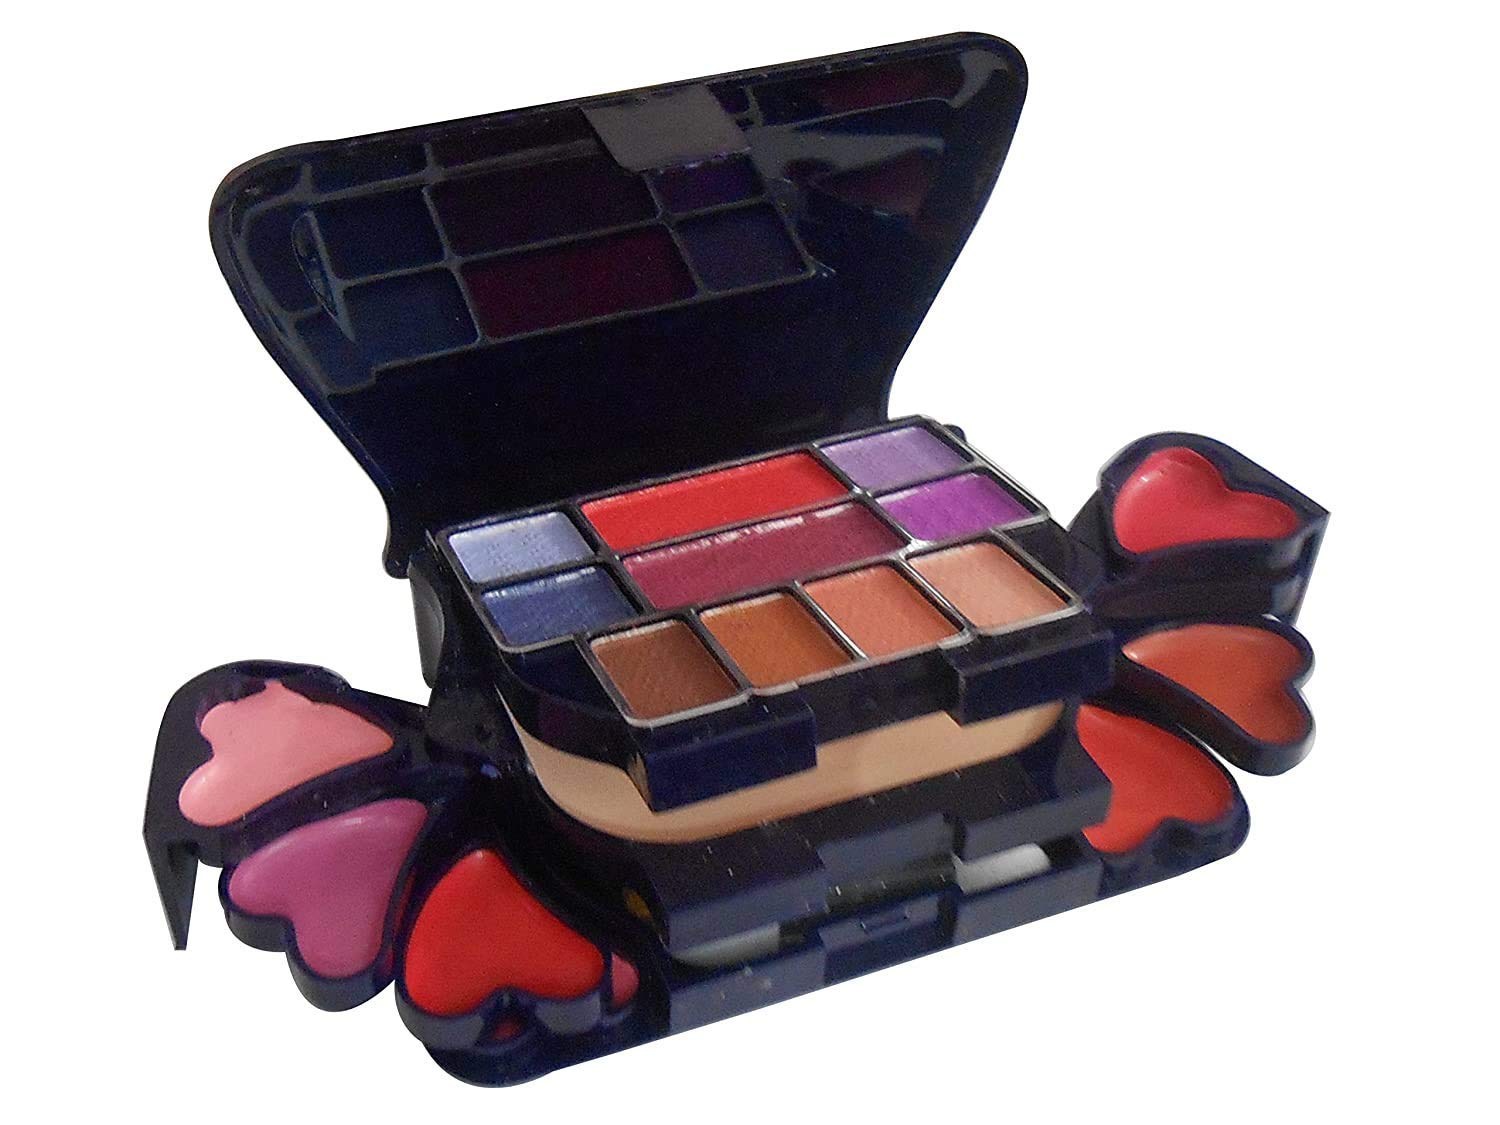 ads-colour-palette-makeup-kit-in-india